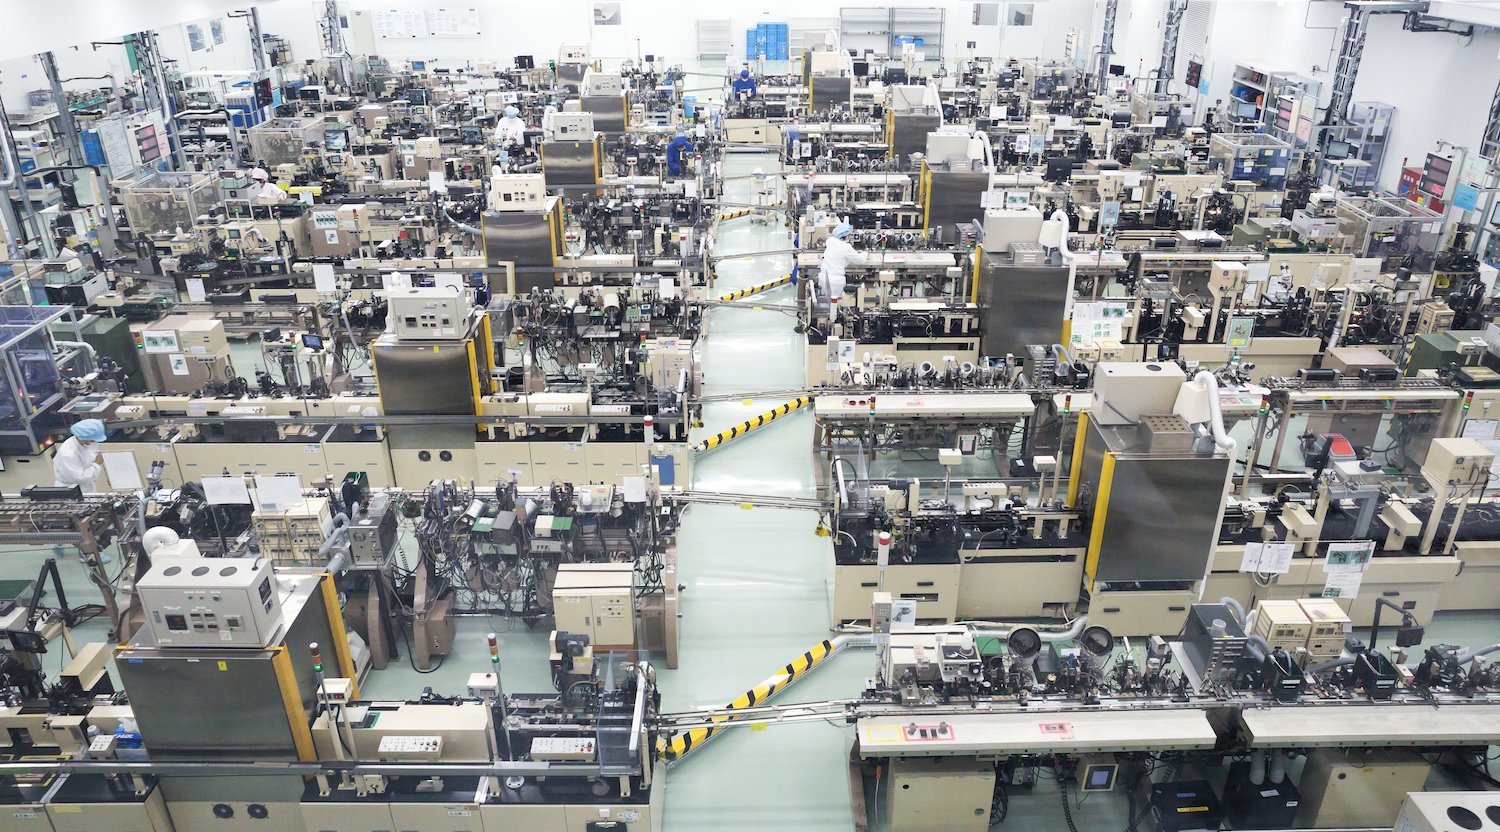 In the world's largest movement factory